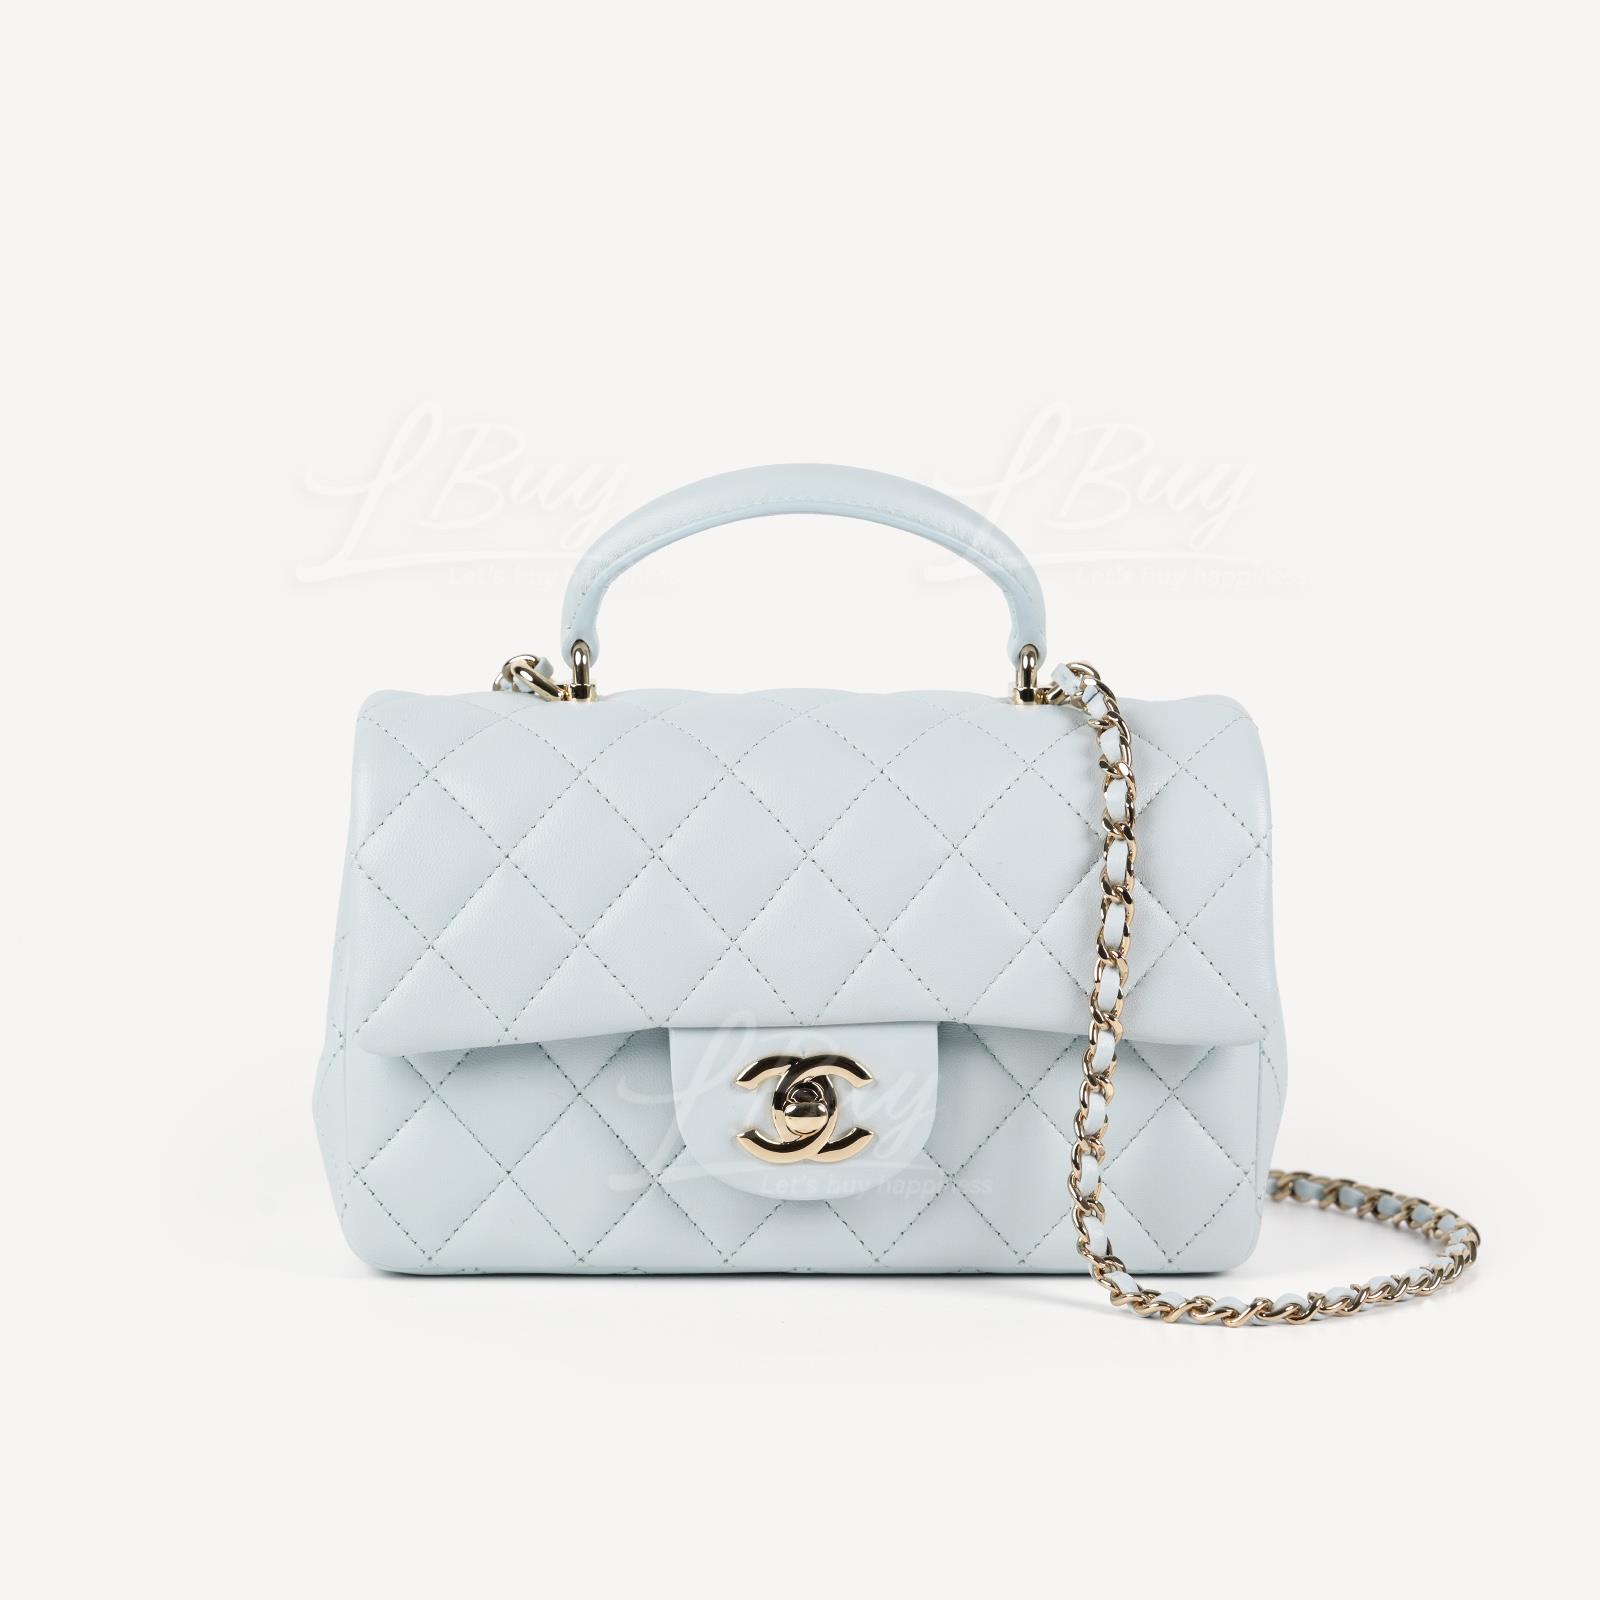 CHANEL-Chanel Light Blue Flap Bag with Top Handle